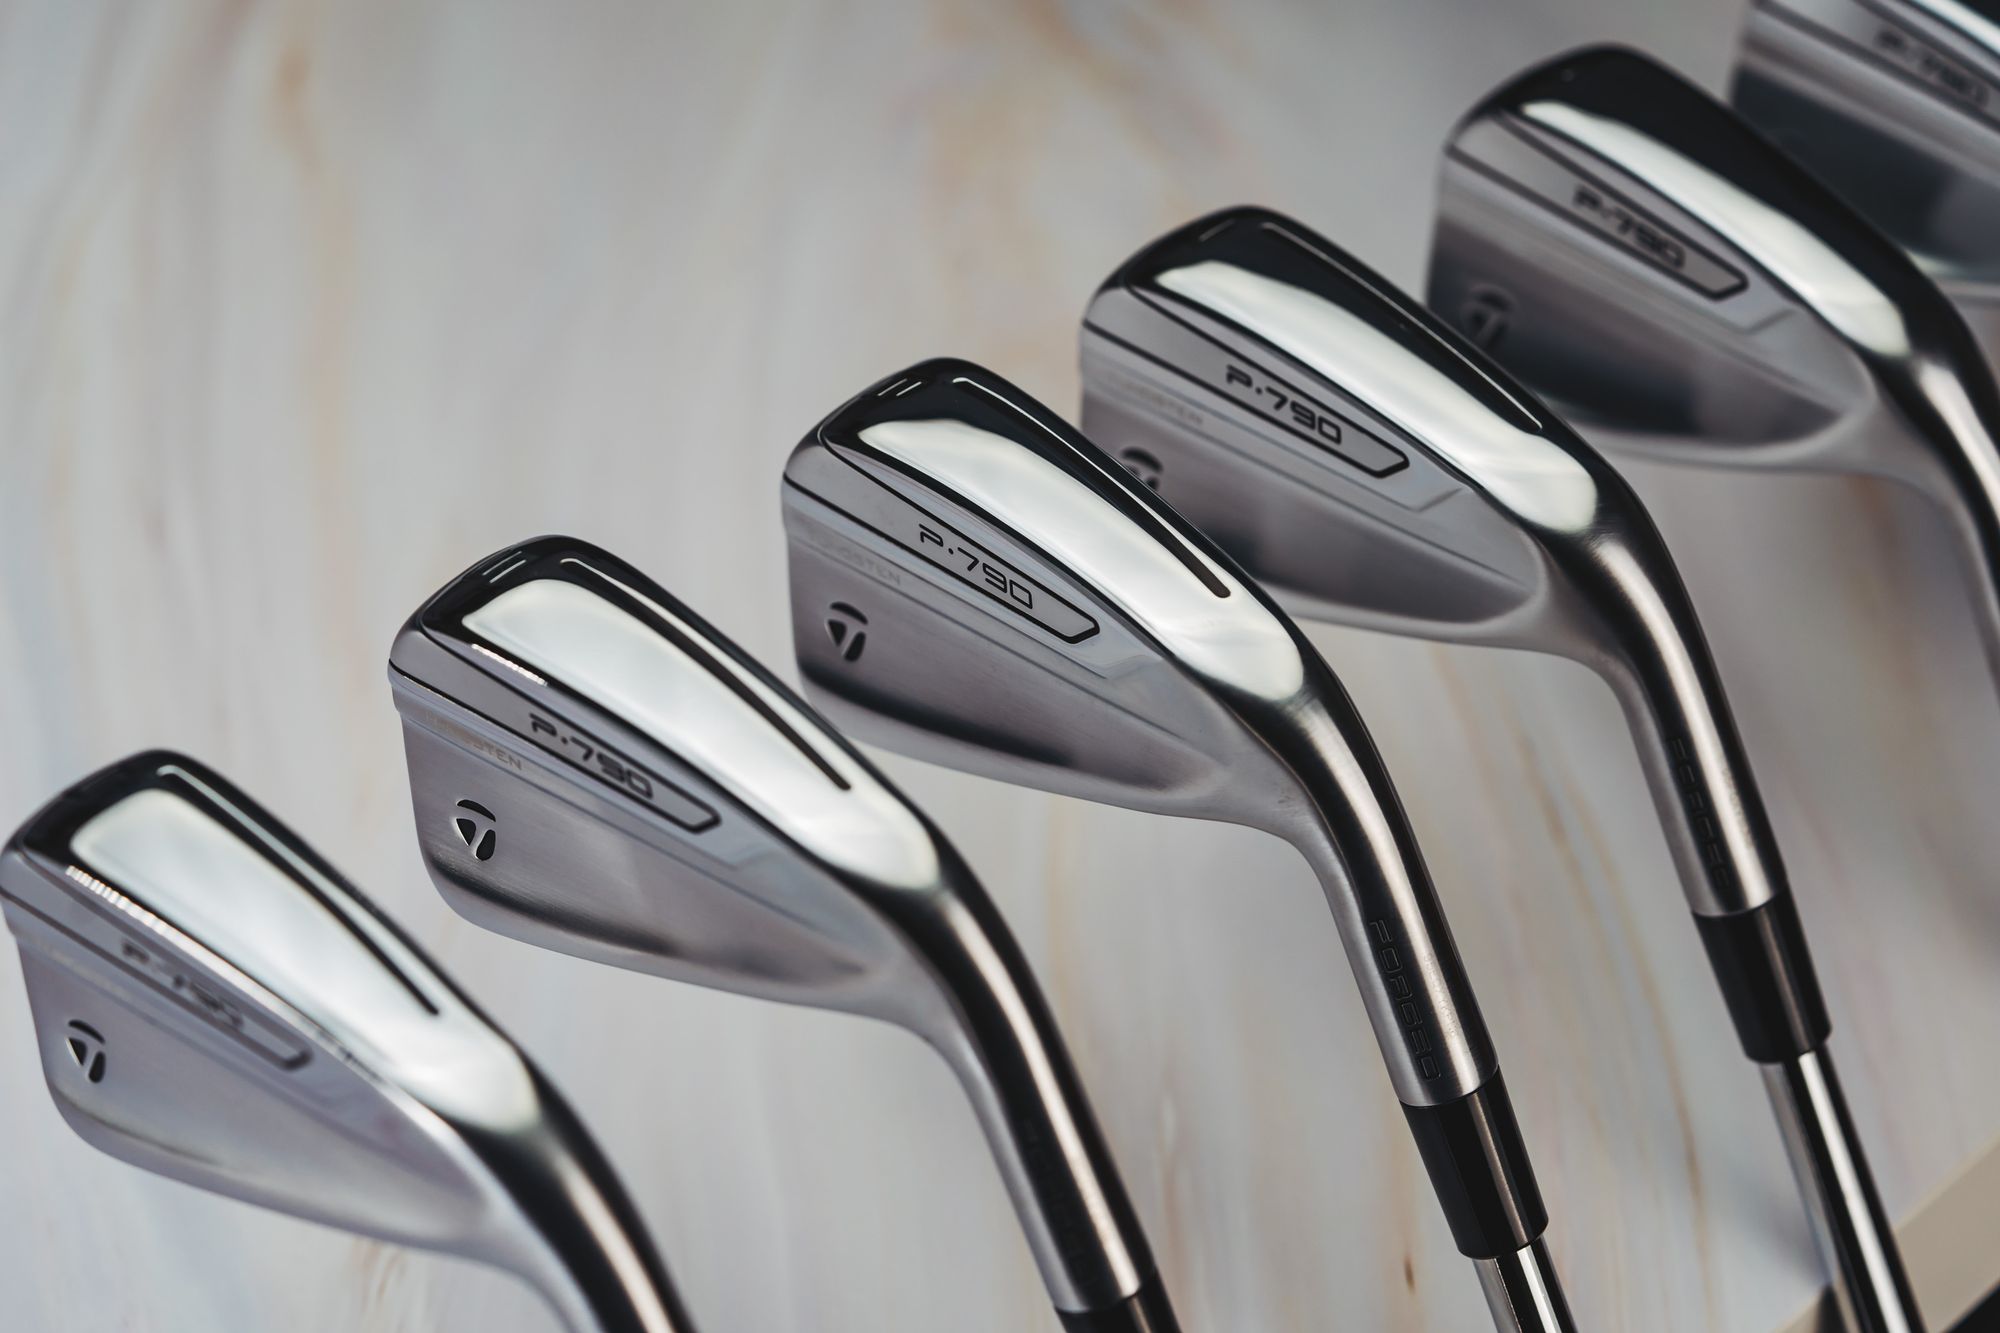 The All NEW TaylorMade P790 Irons